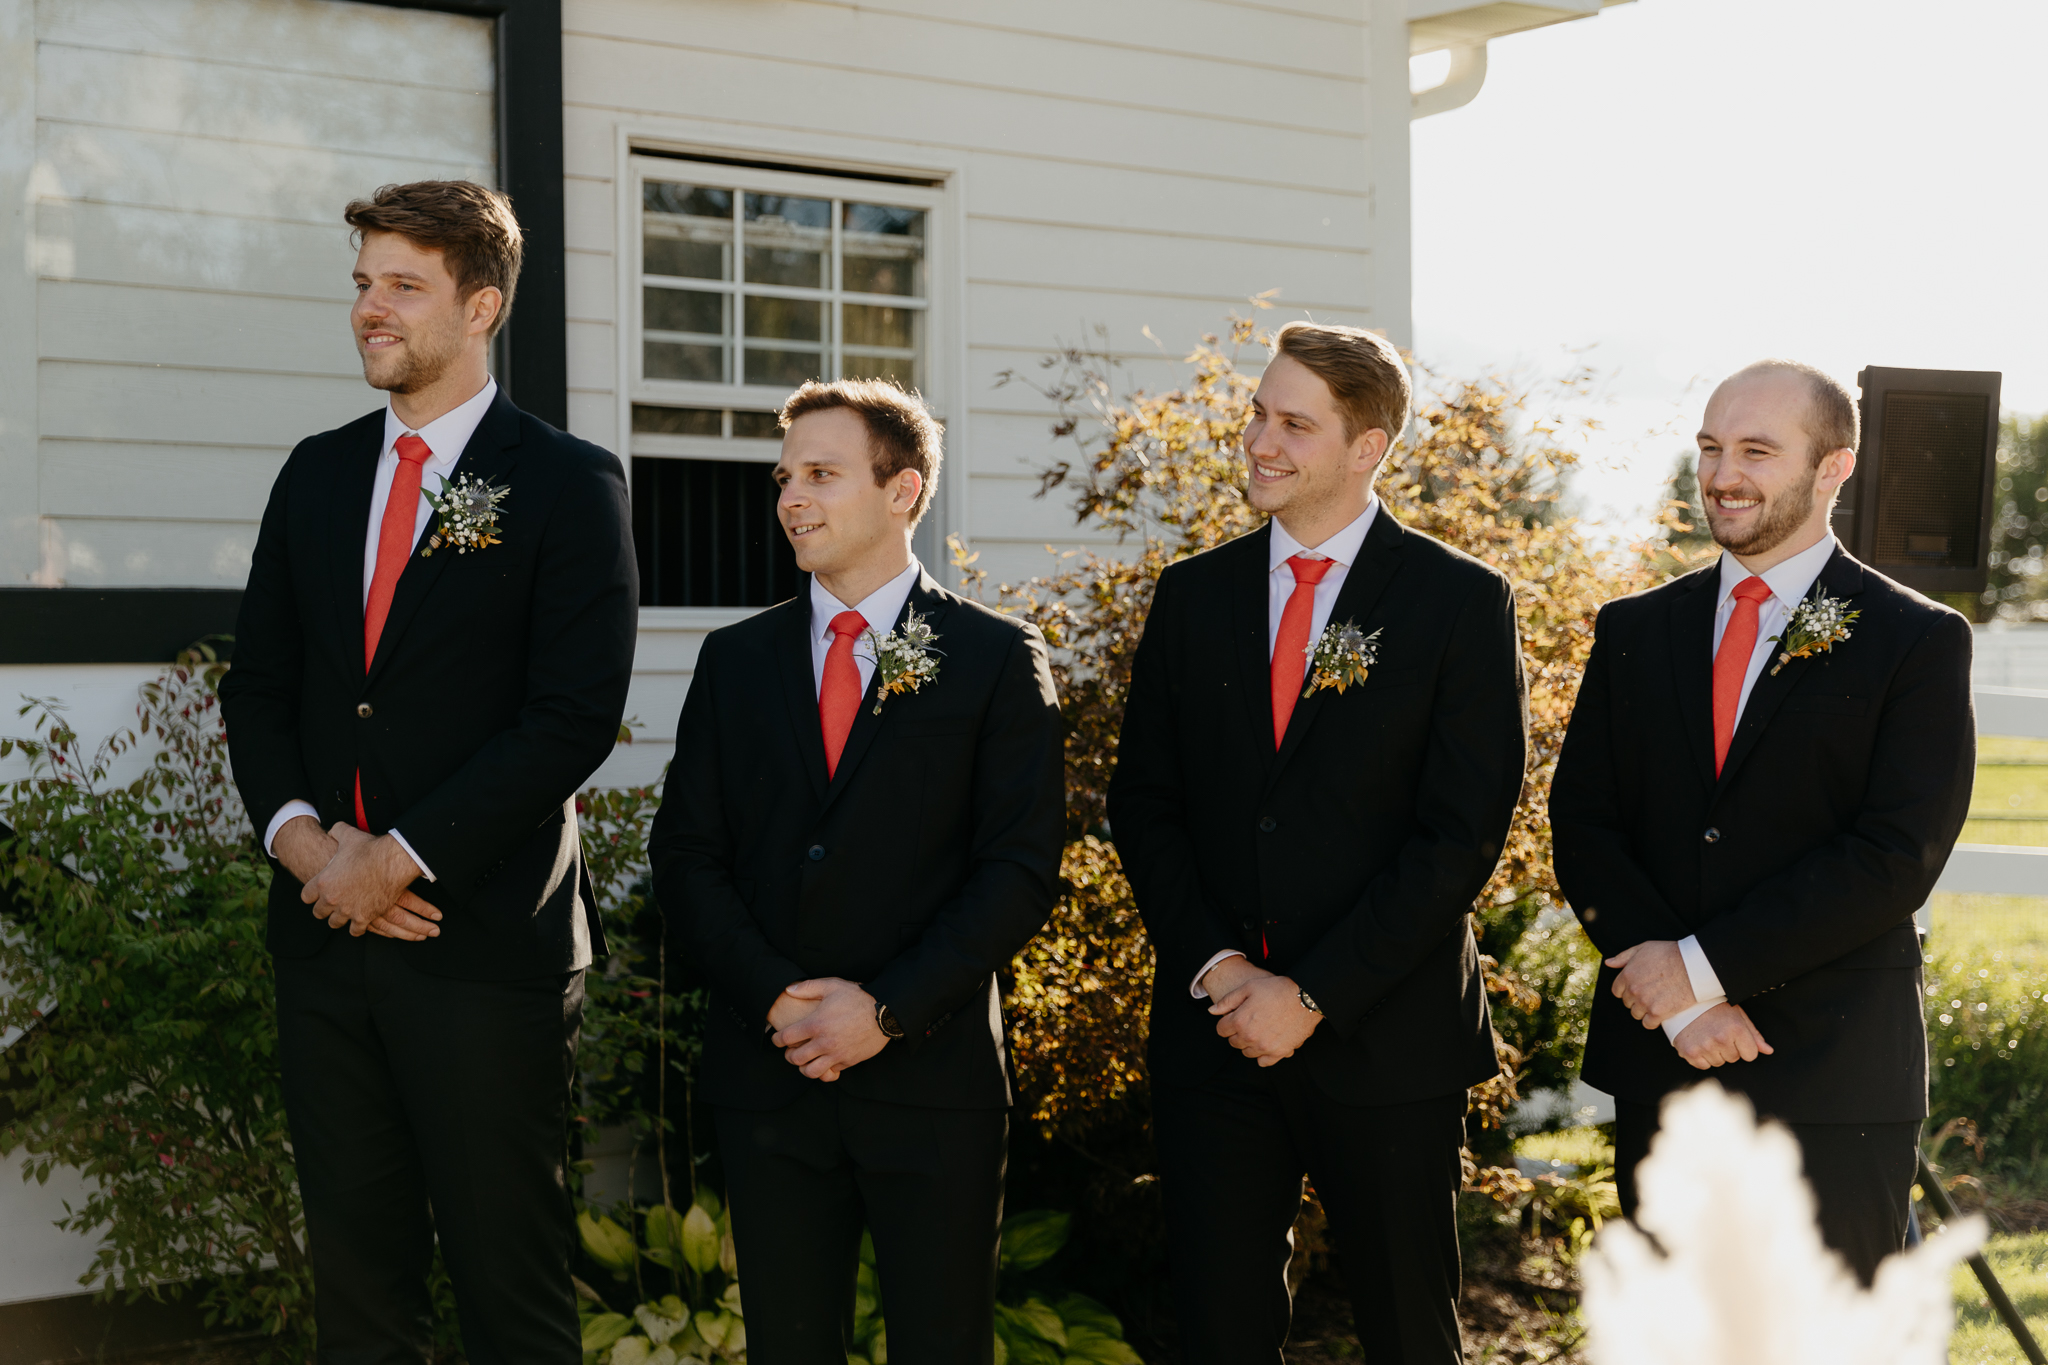 Groomsmen lined up and watching the wedding ceremony at a horse farm